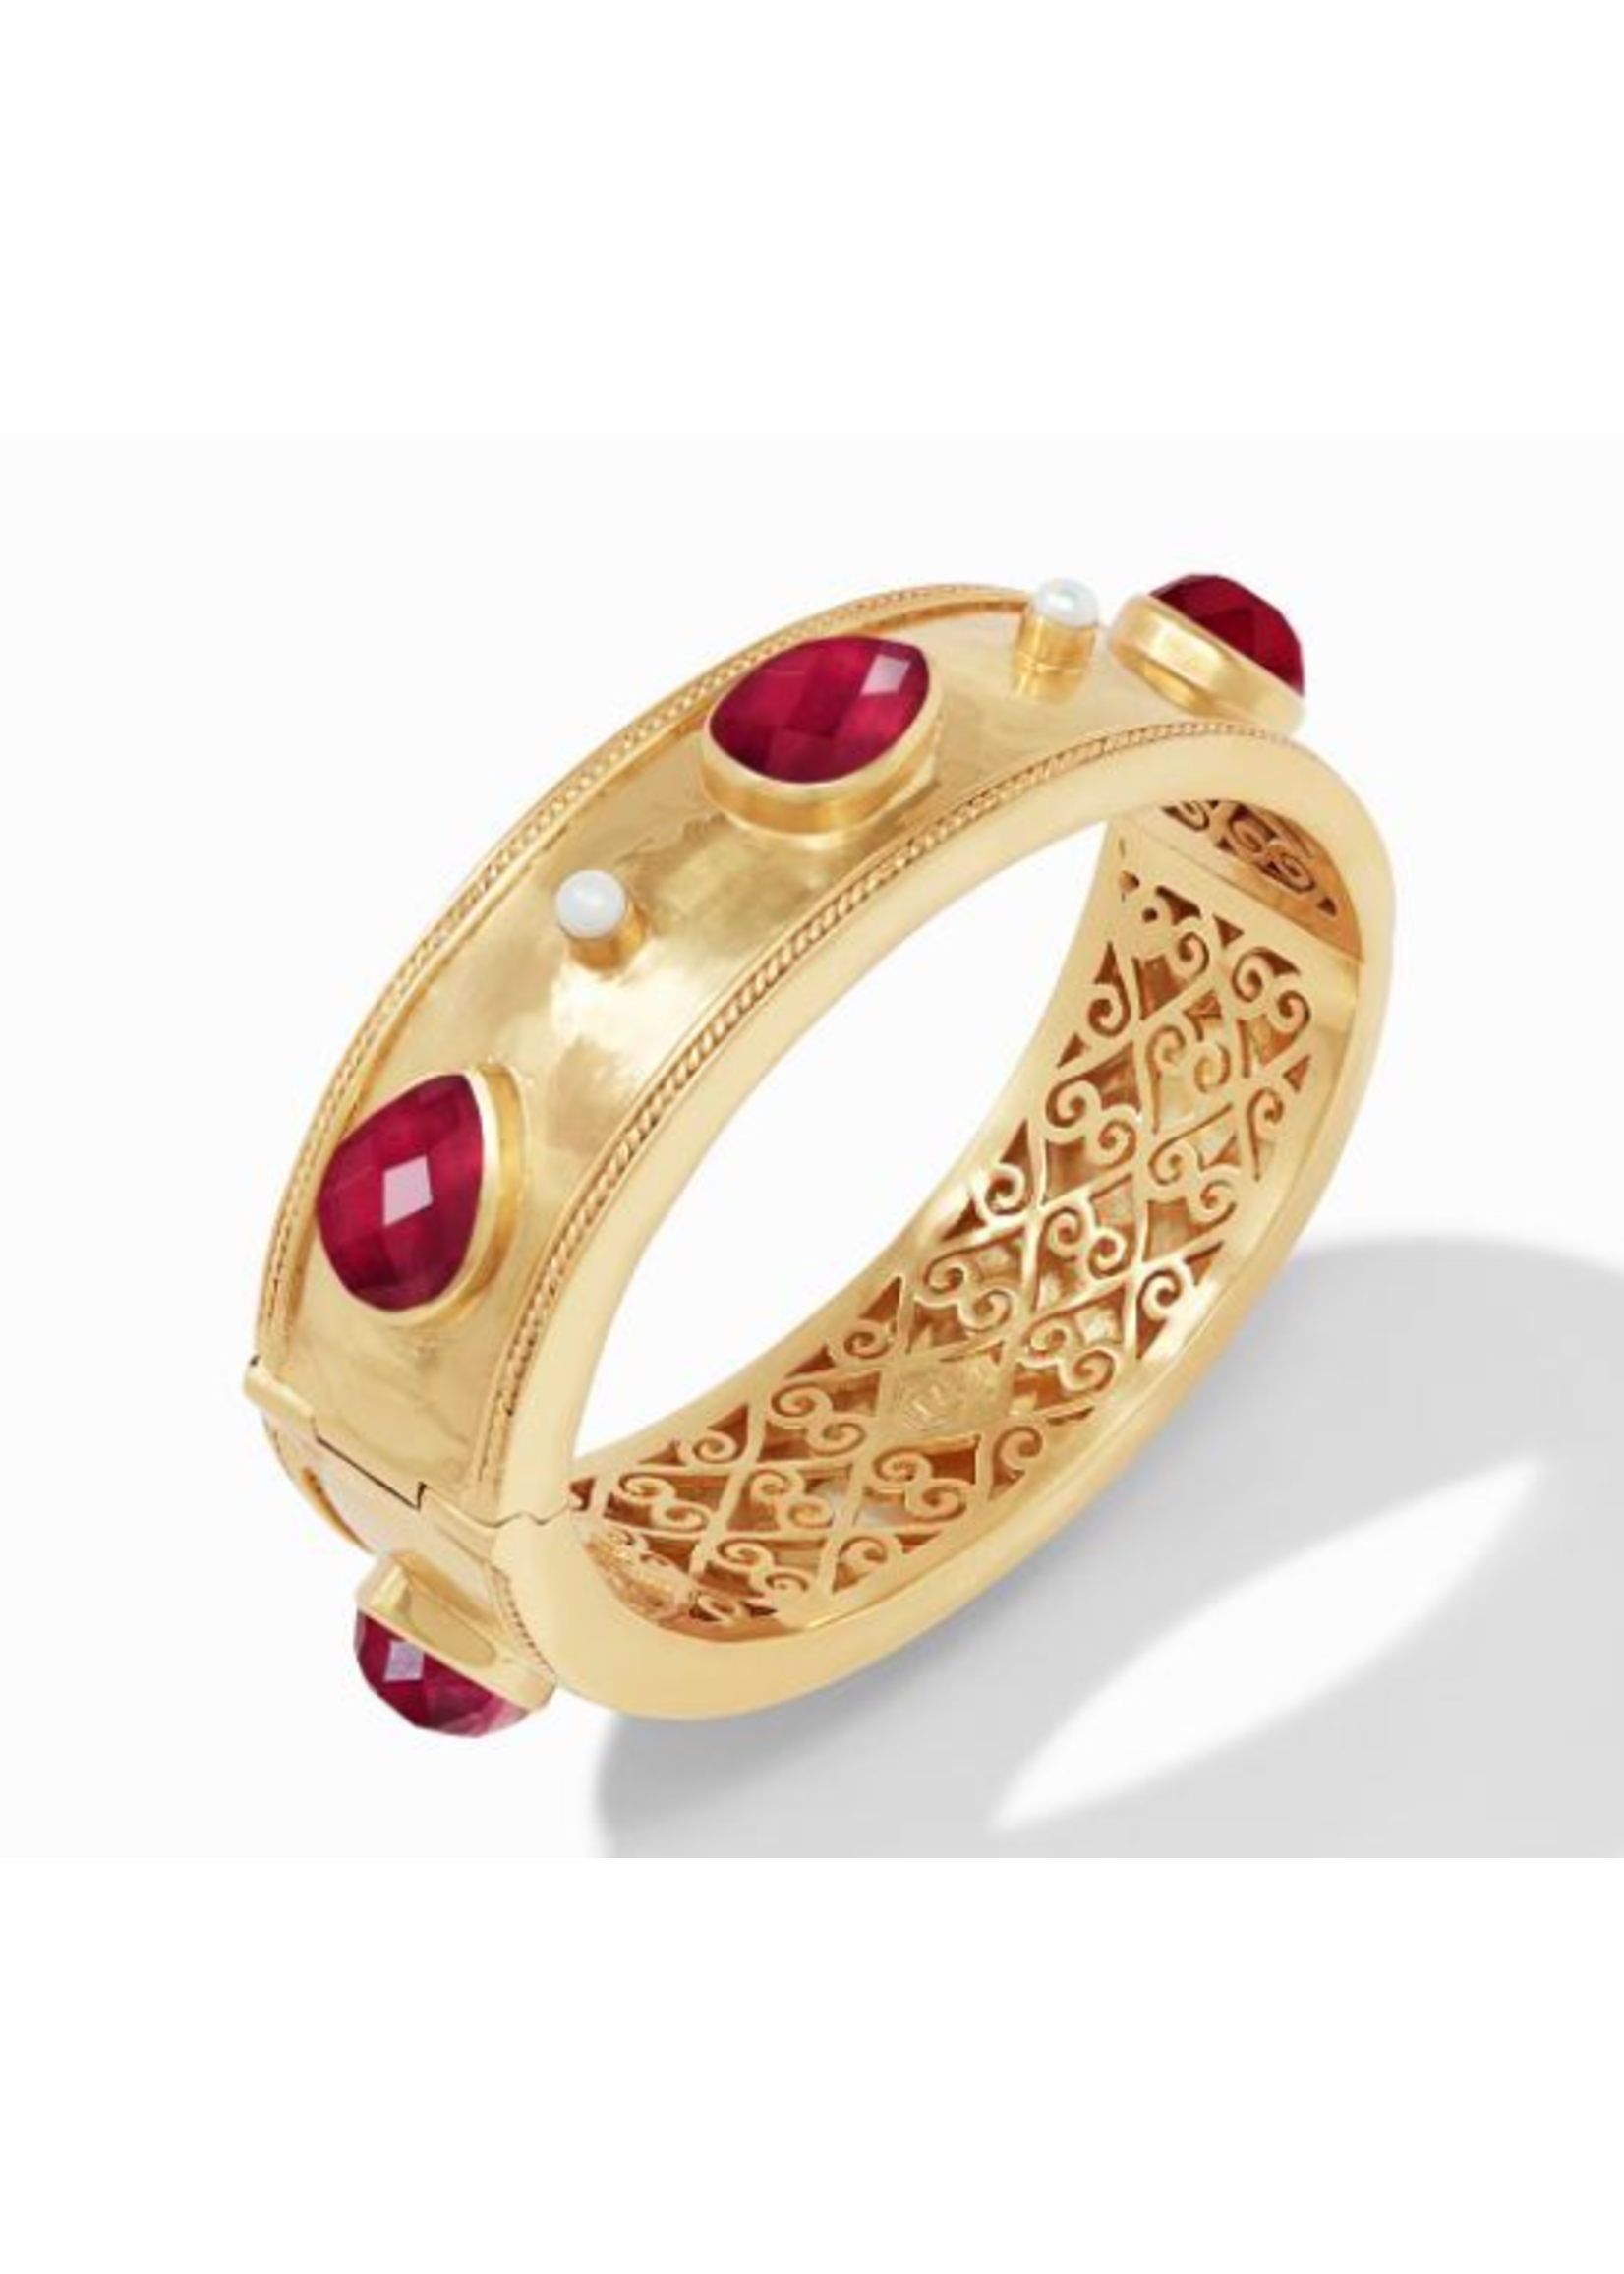 Julie Vos Cassis Statement Hinge Bangle Gold Iridescent Ruby Red w Pearl